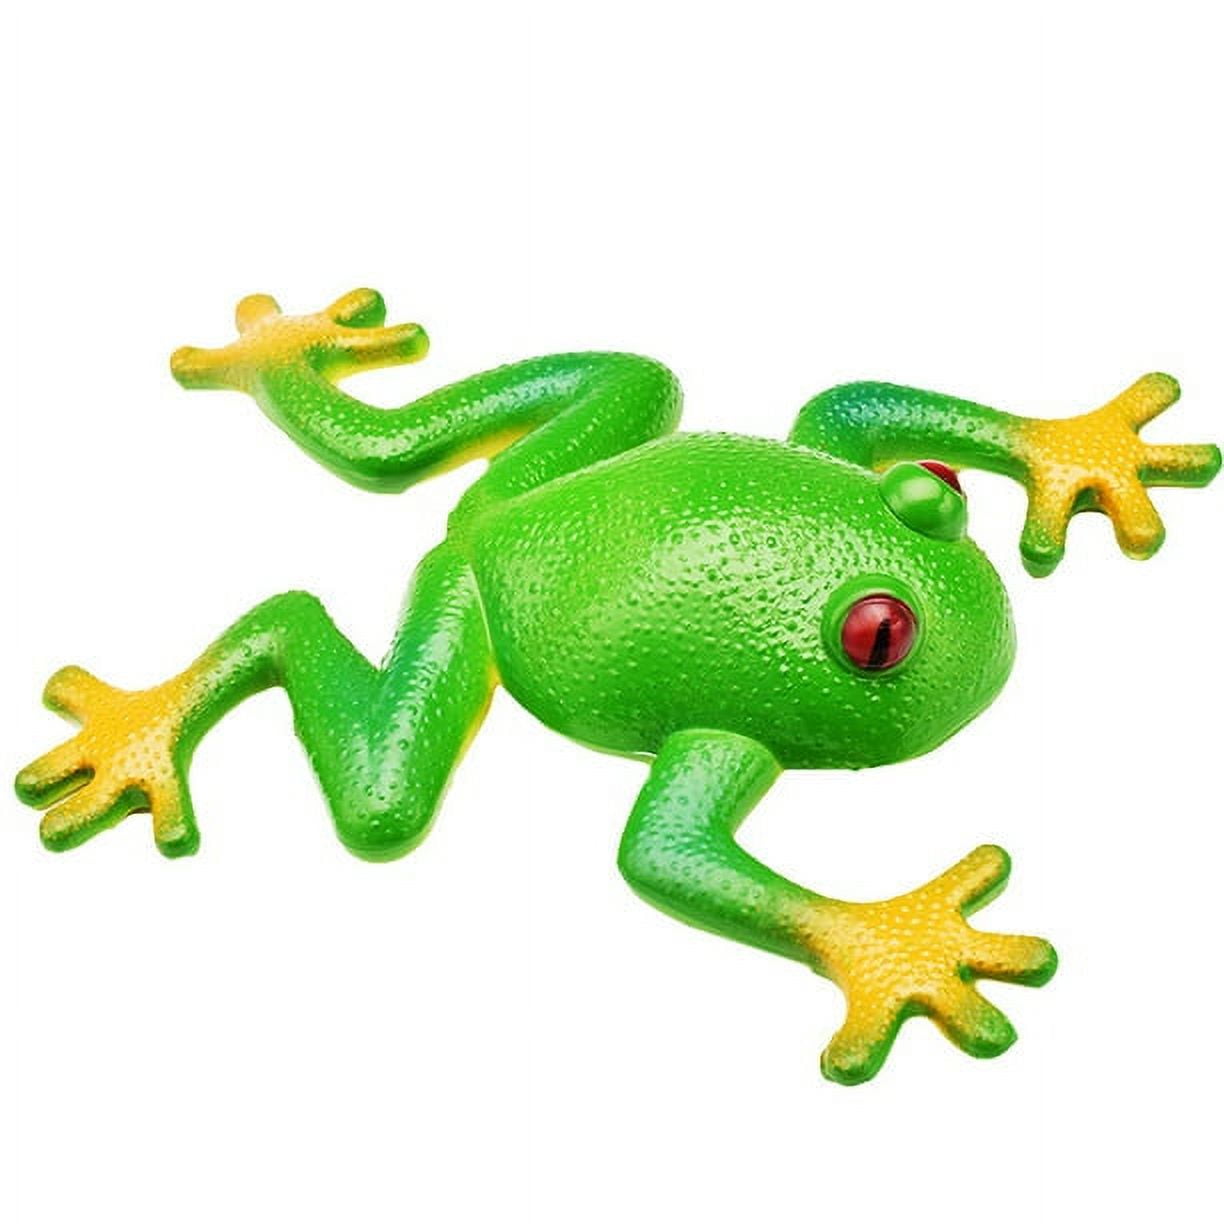 Dido Rubber Simulation Frog Stretchy Toy Stress Relief Sensory Toy